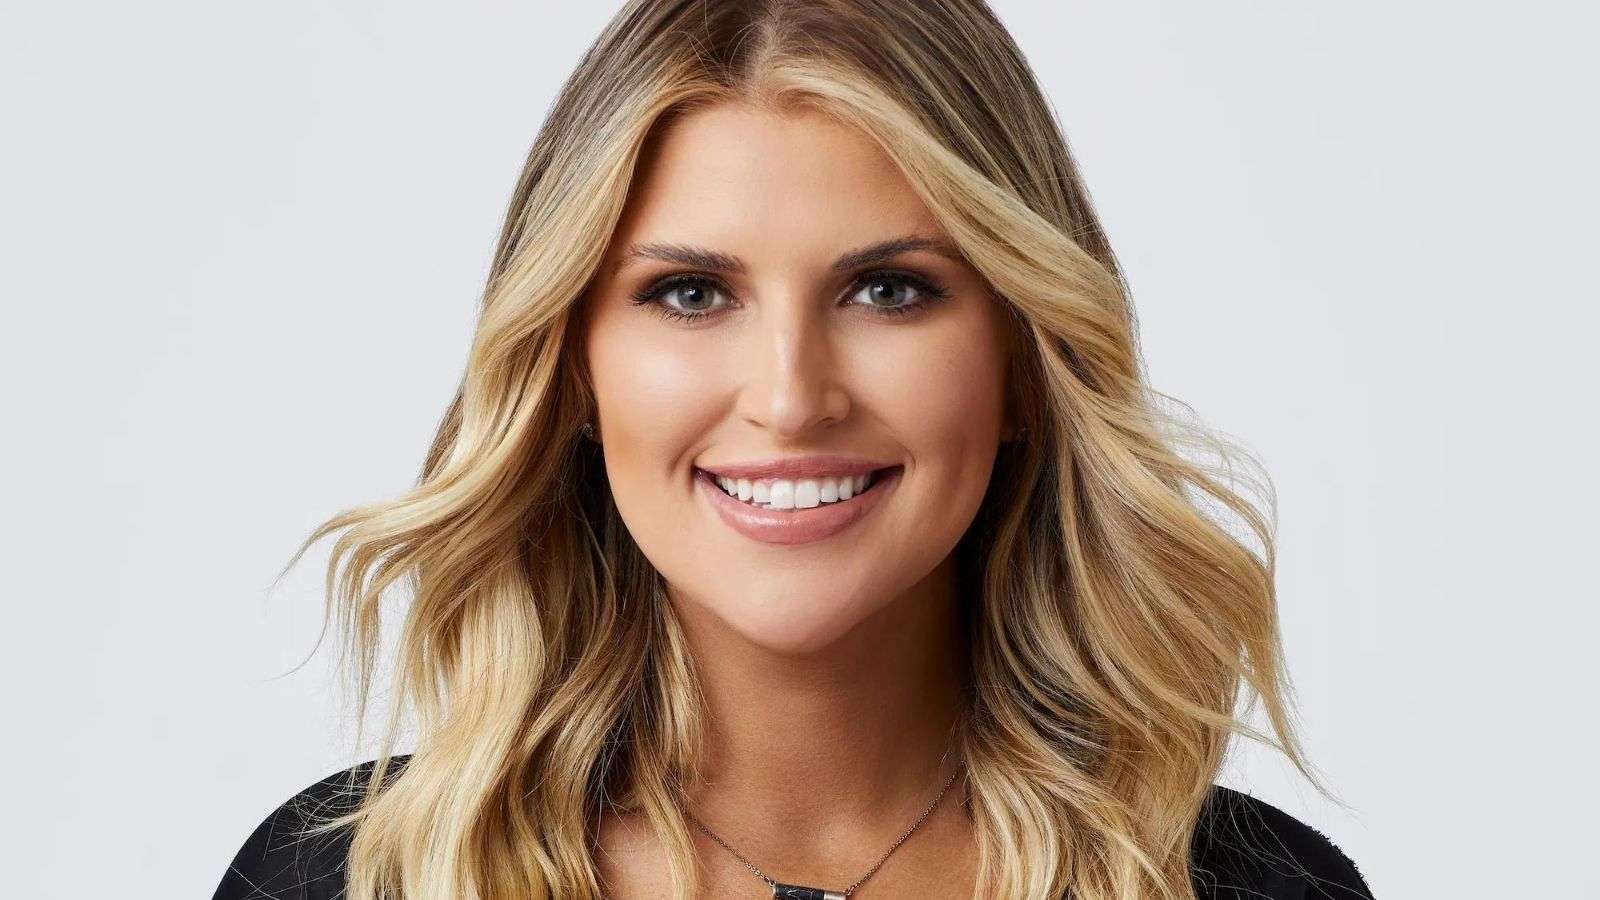 Claire from The Bachelor